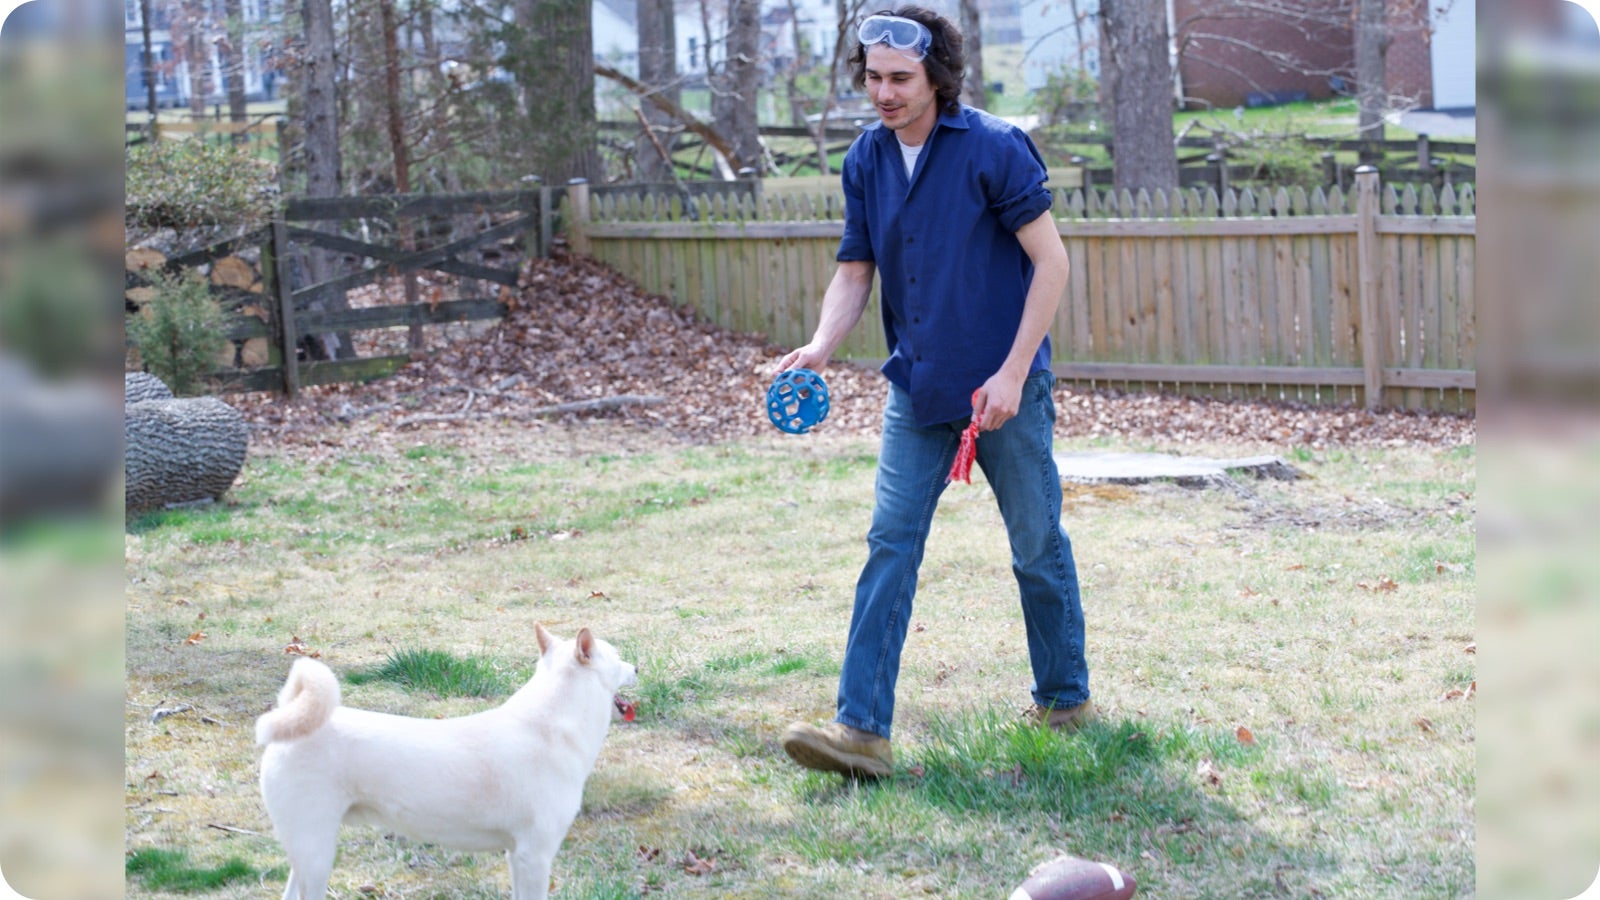 eBay Seller Jeff Abed plays catch with a dog